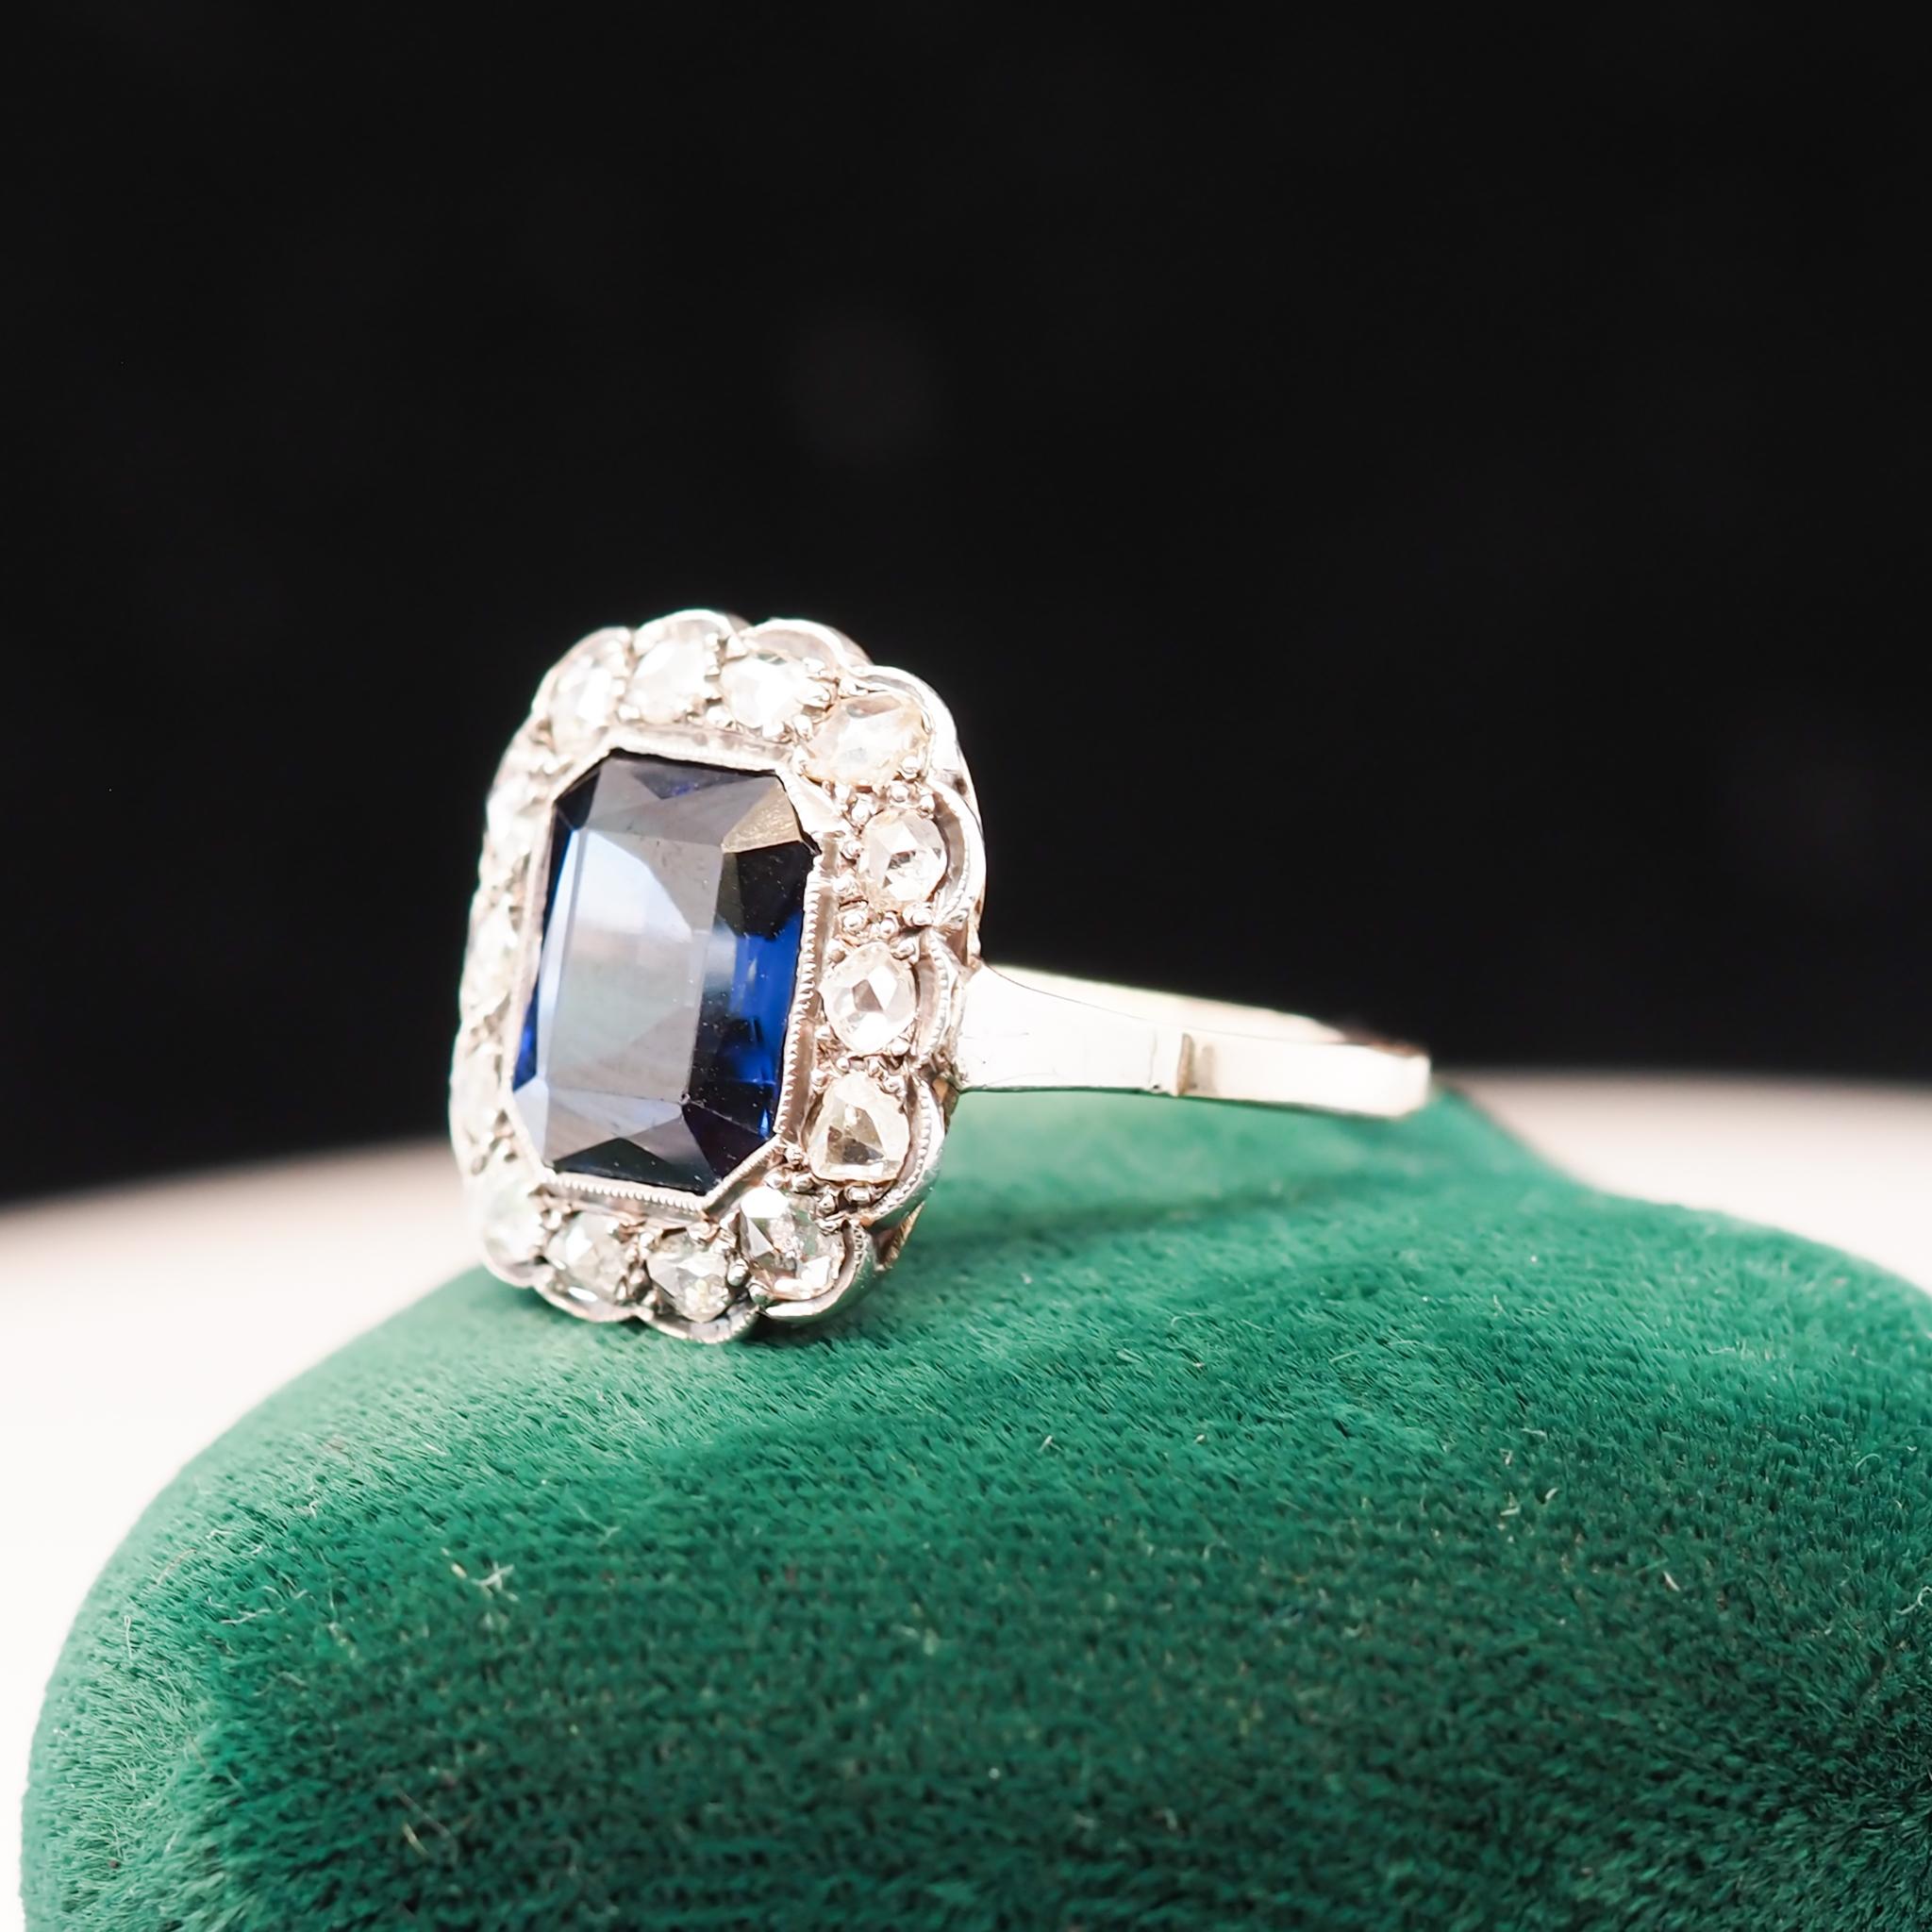 Item Details:
Ring Size: 7.25
Metal Type: 14K Yellow Gold [Hallmarked, and Tested]
Weight: 1.6grams

Diamond Details: Natural Diamonds, Rose Cut, .50ct total weight, G-H Color, VS Clarity

Sapphire Details: Blue, Synthetic, 10mm x 8mm, Radiant